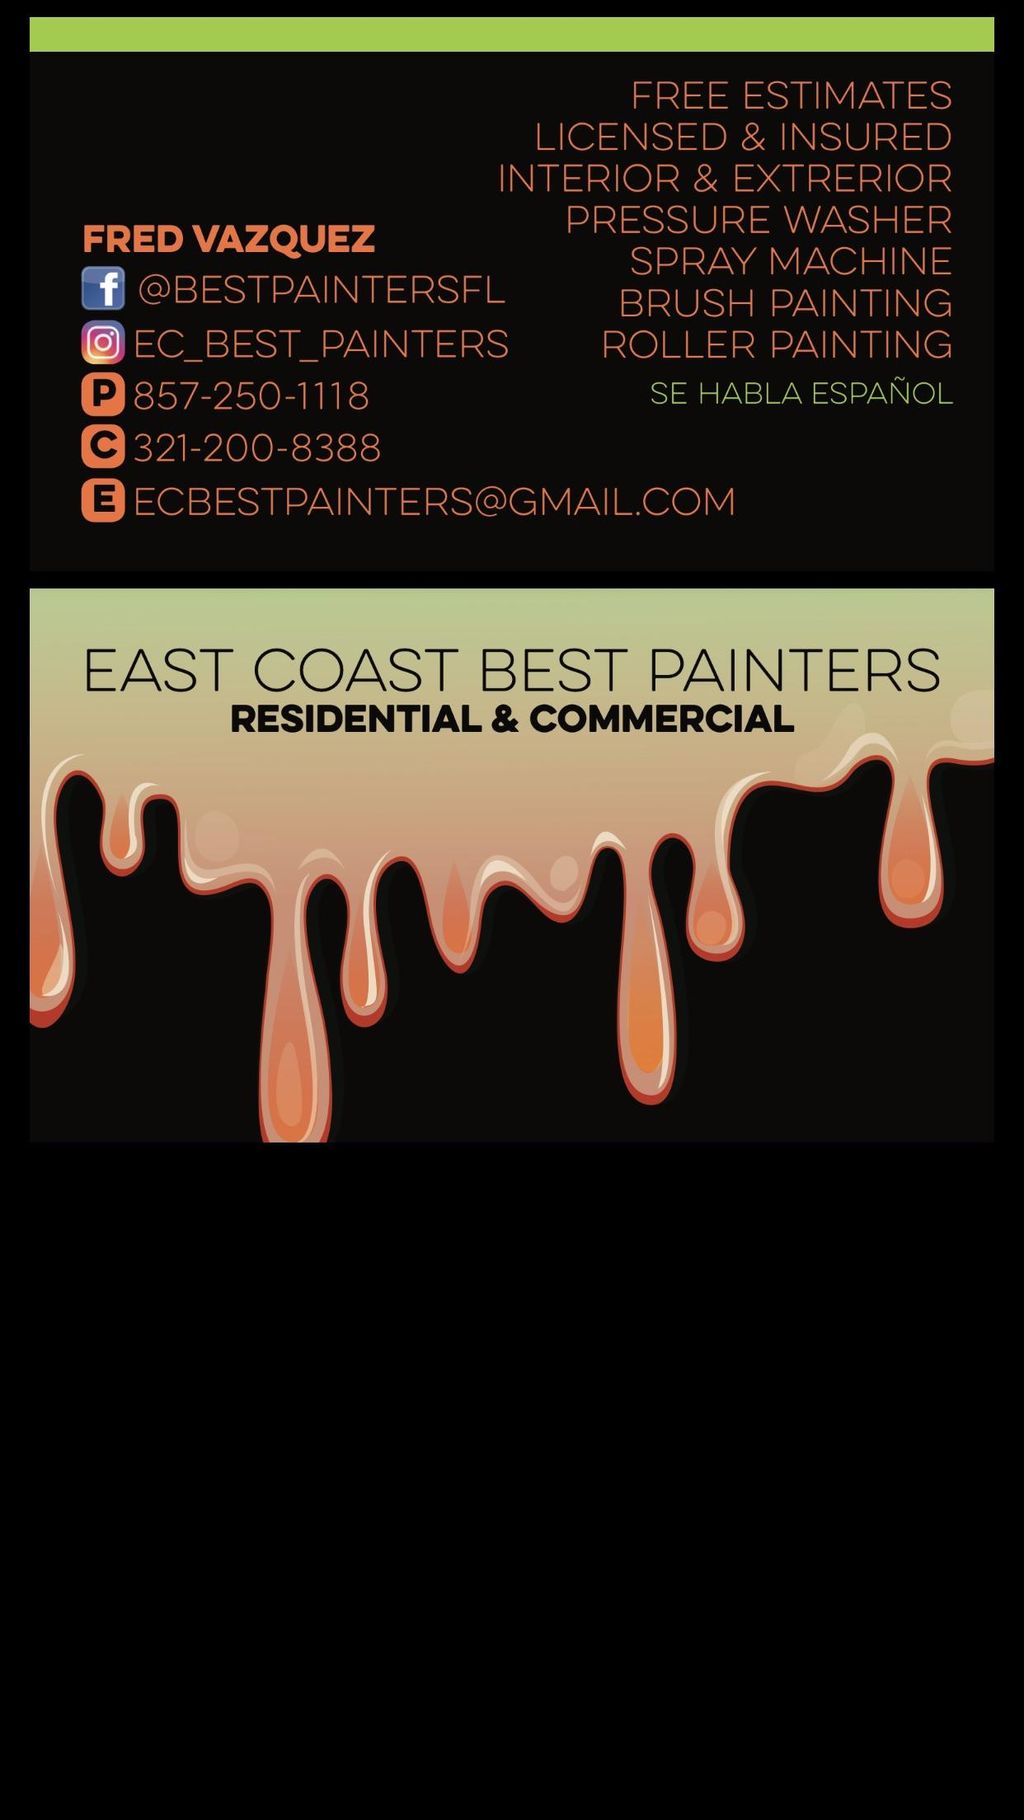 East cost best painters